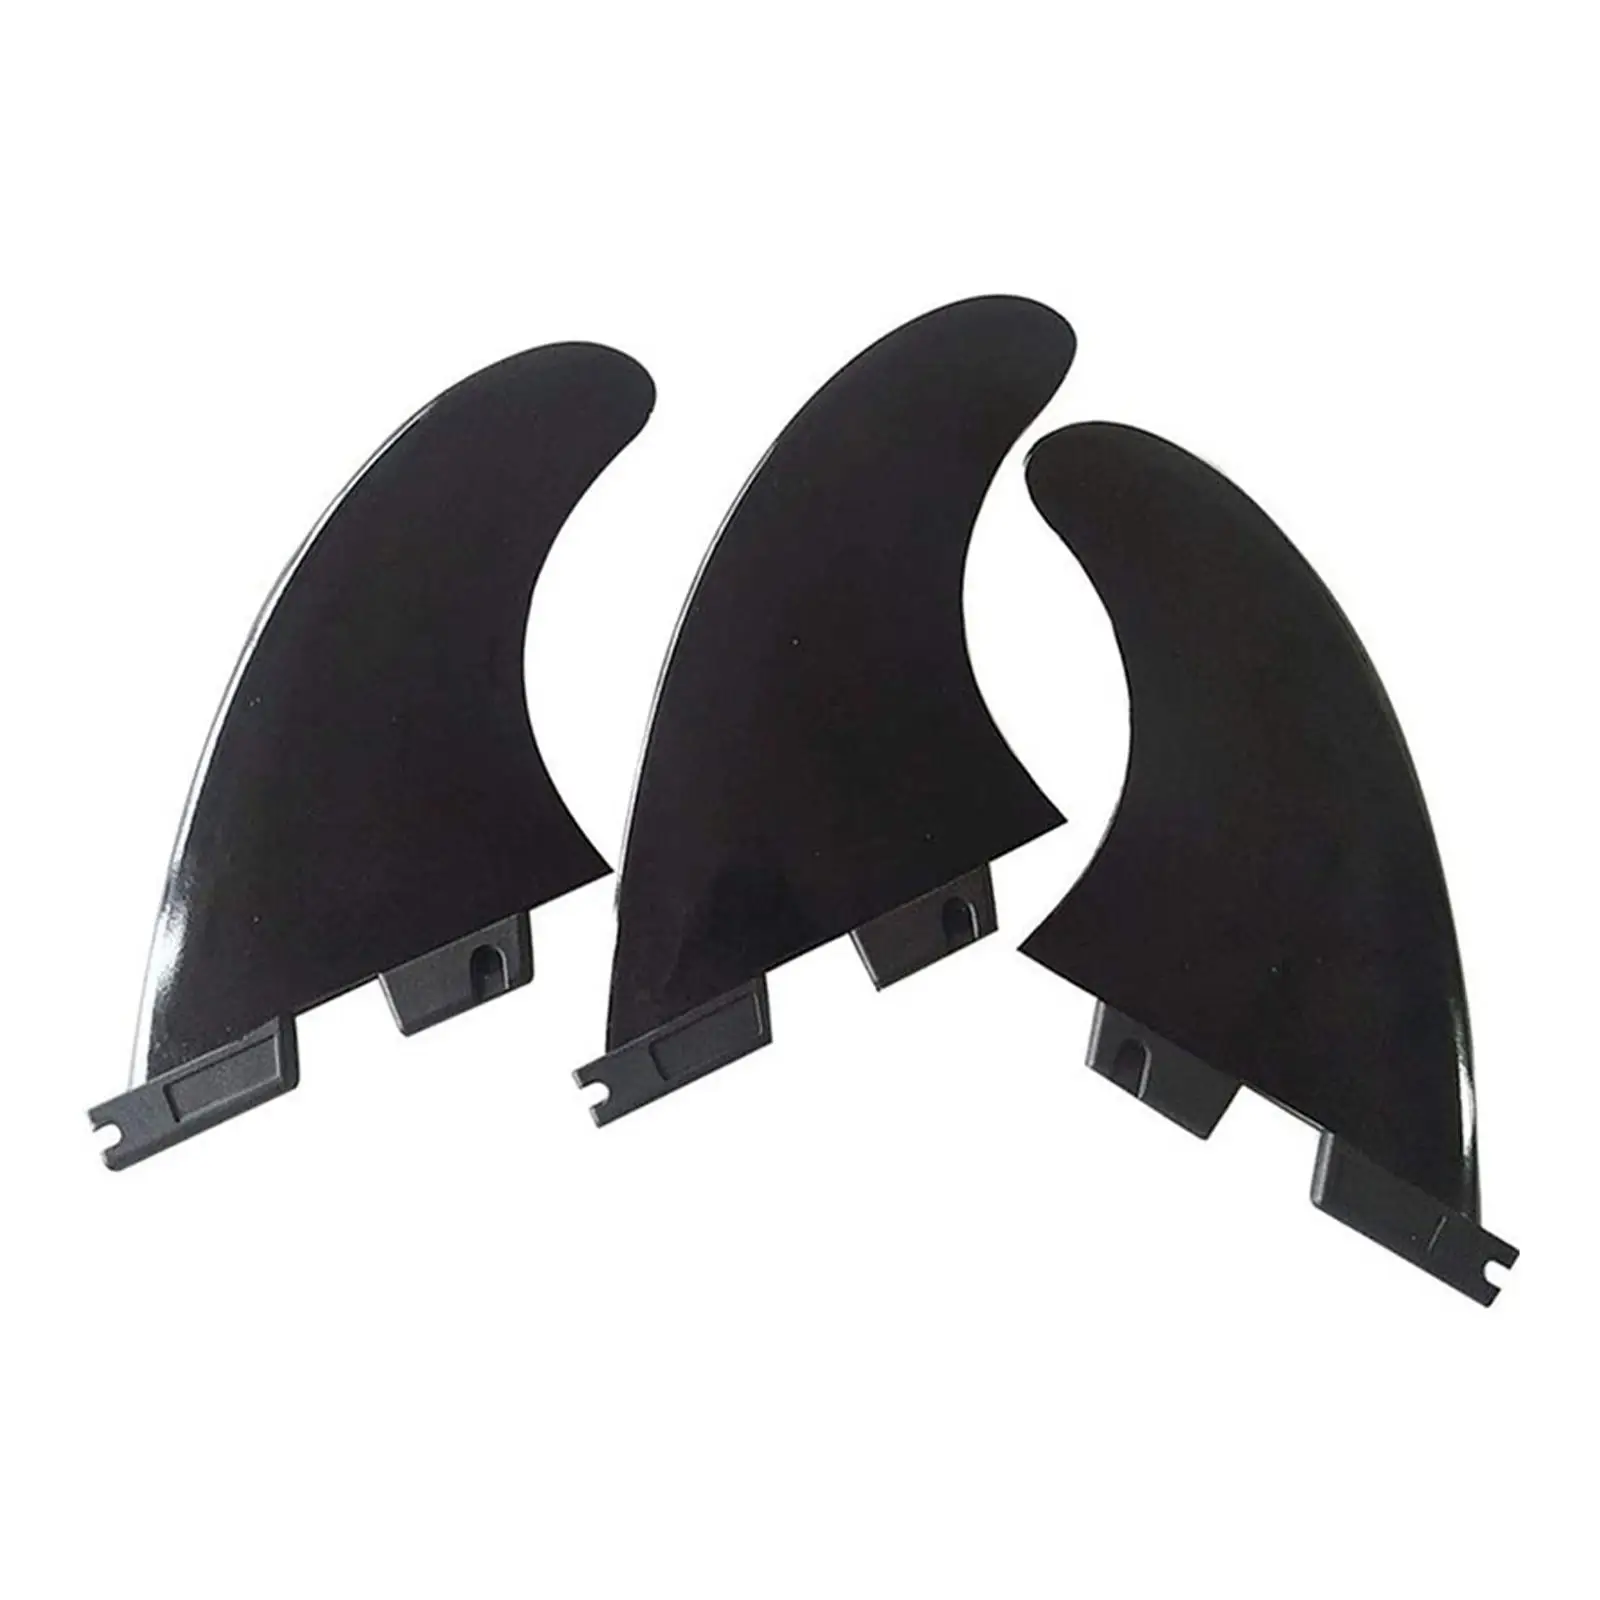 3x Surfboard Fin Durable Detachable Surfboard Tail Rudder Surfing Fin for Longboard Surfing Boards Paddleboard Dinghy Parts